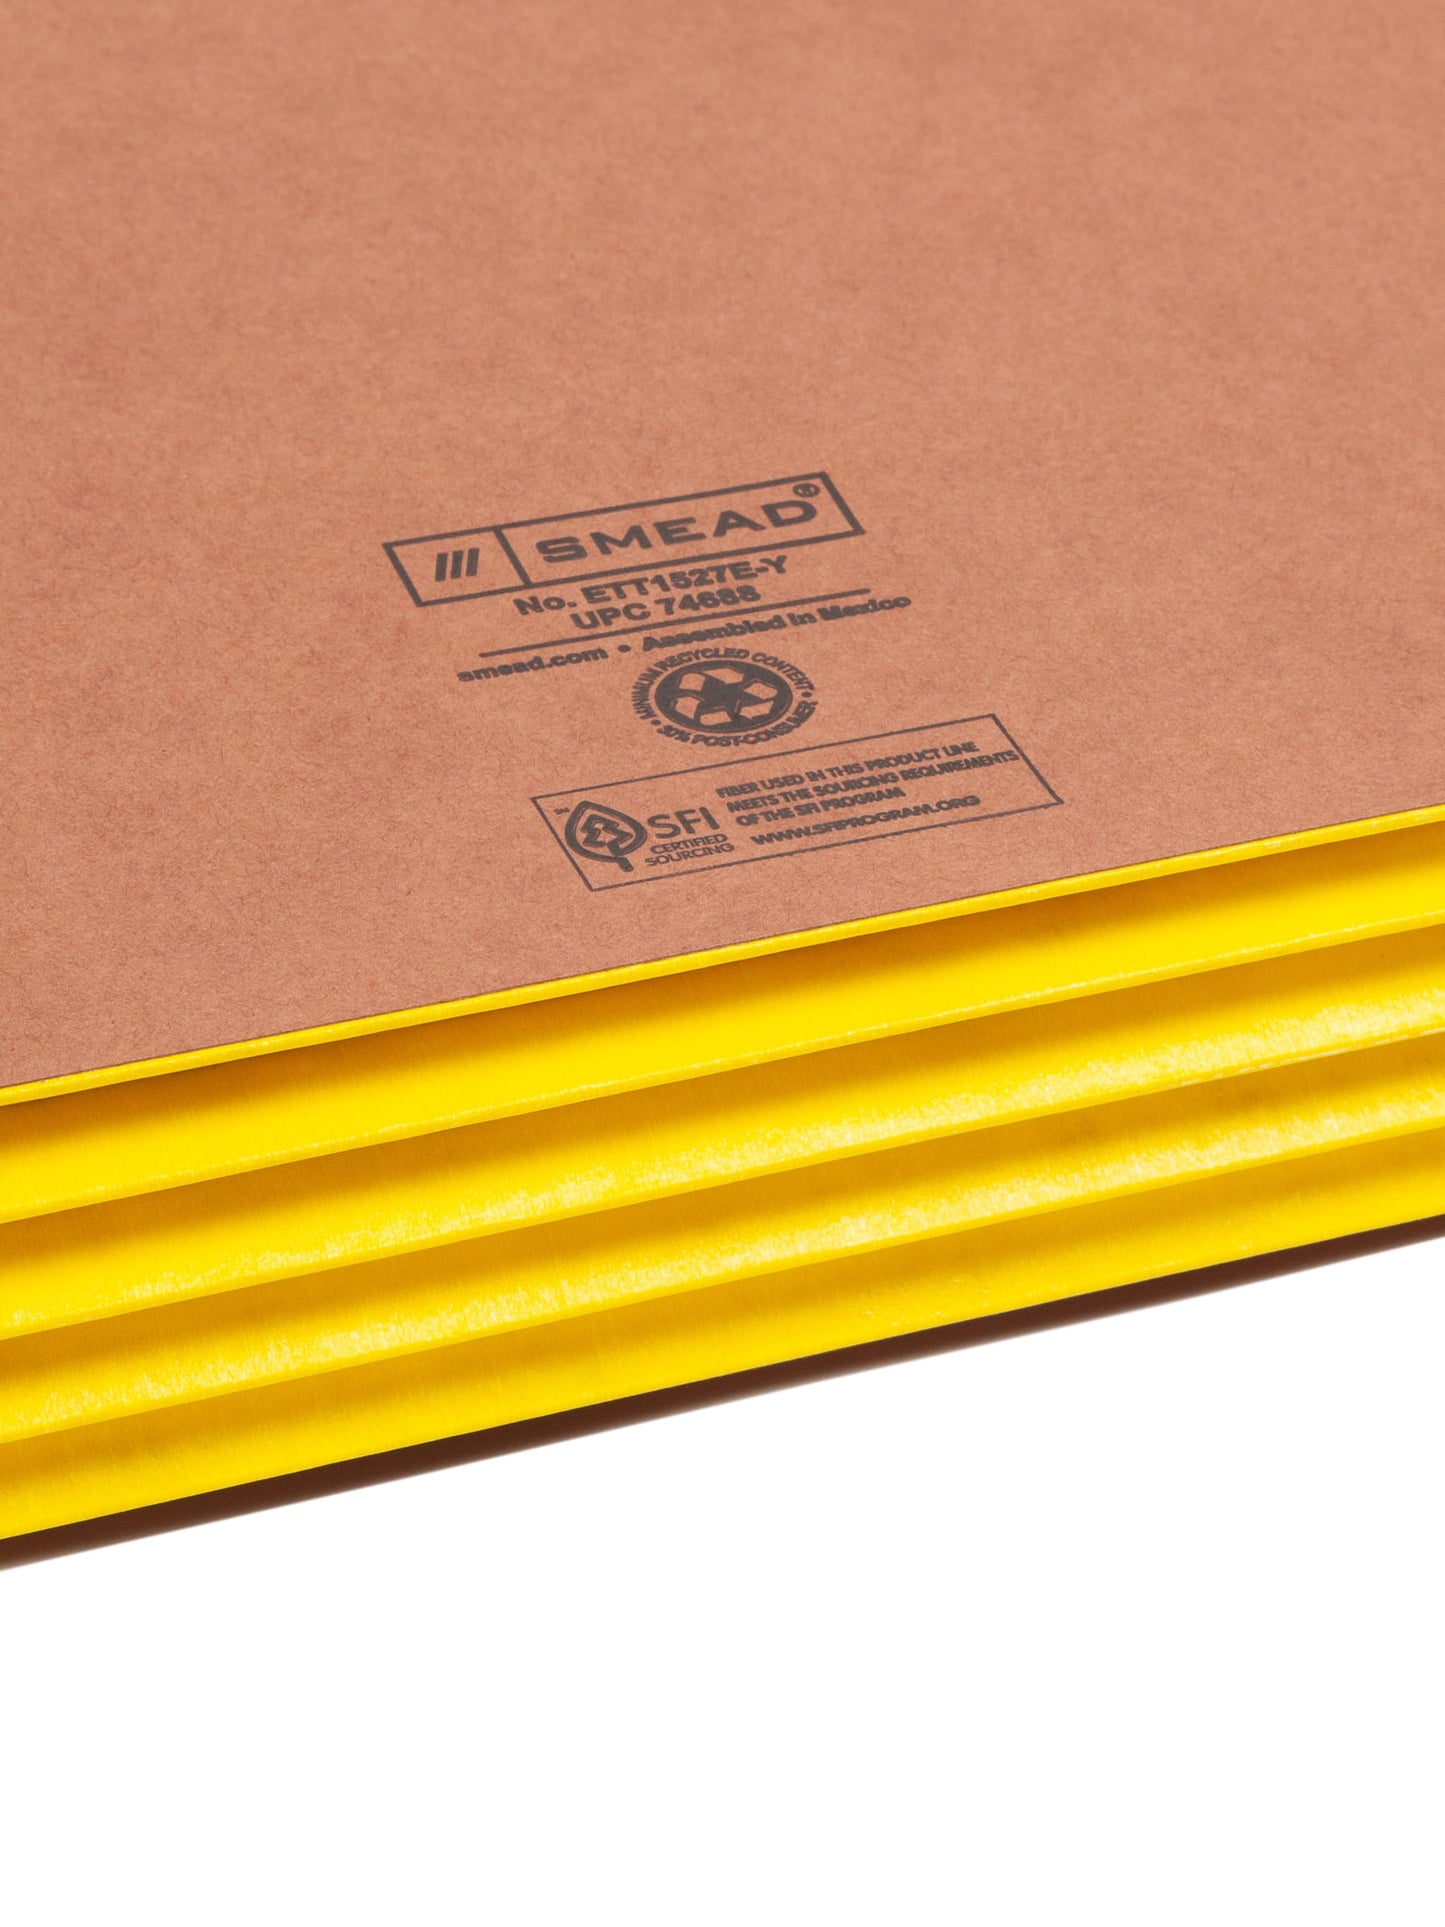 Reinforced End Tab File Pockets, Straight-Cut Tab, 3-1/2 inch Expansion, Yellow Color, Extra Wide Legal Size, Set of 0, 30086486746886